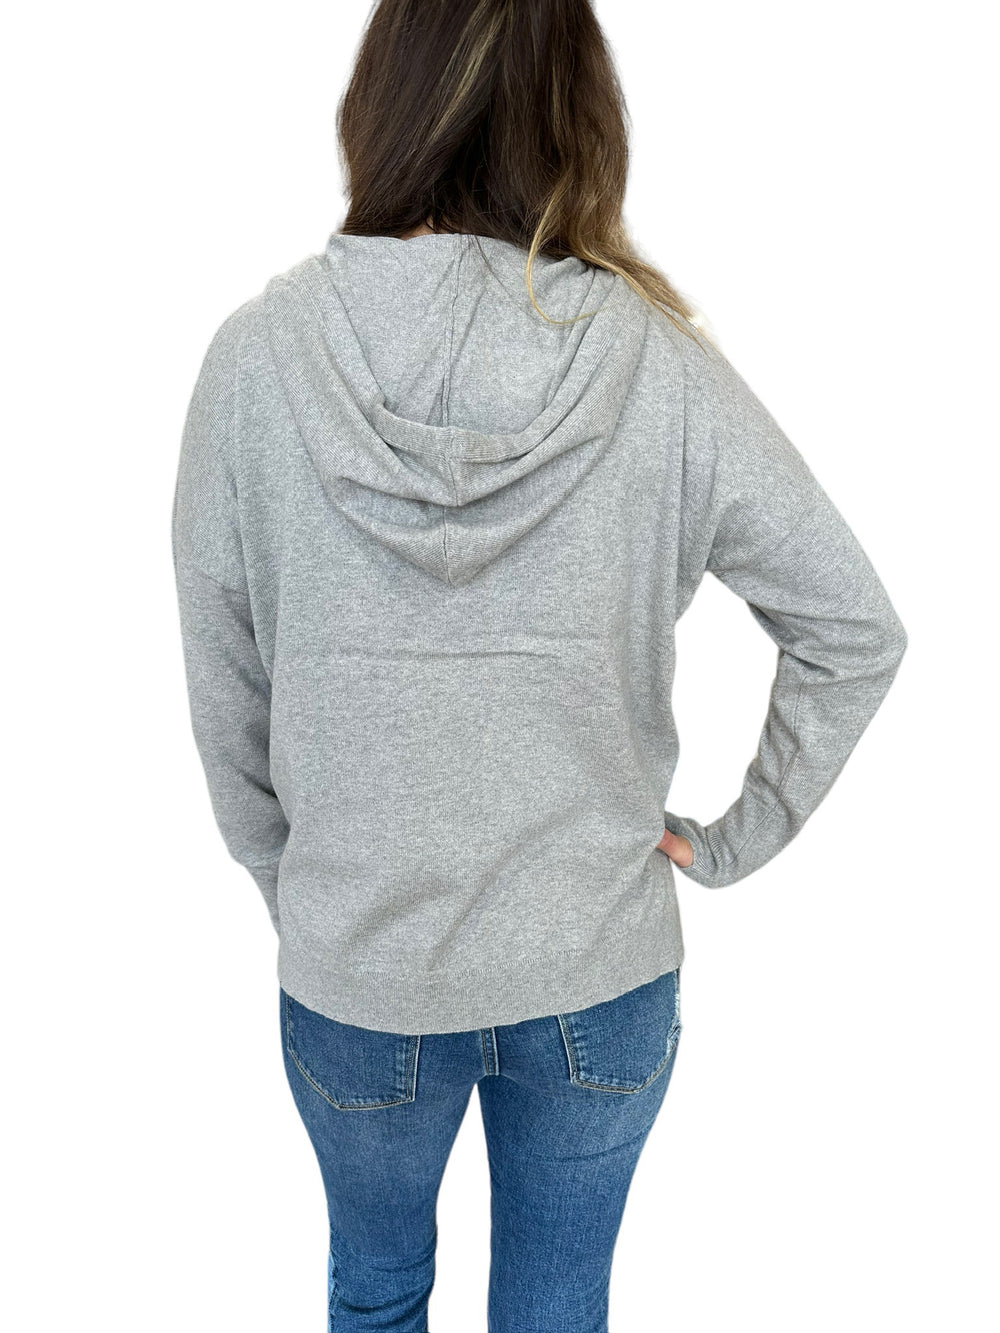 STRIPED HEART HOODIE - HEATHER - Kingfisher Road - Online Boutique